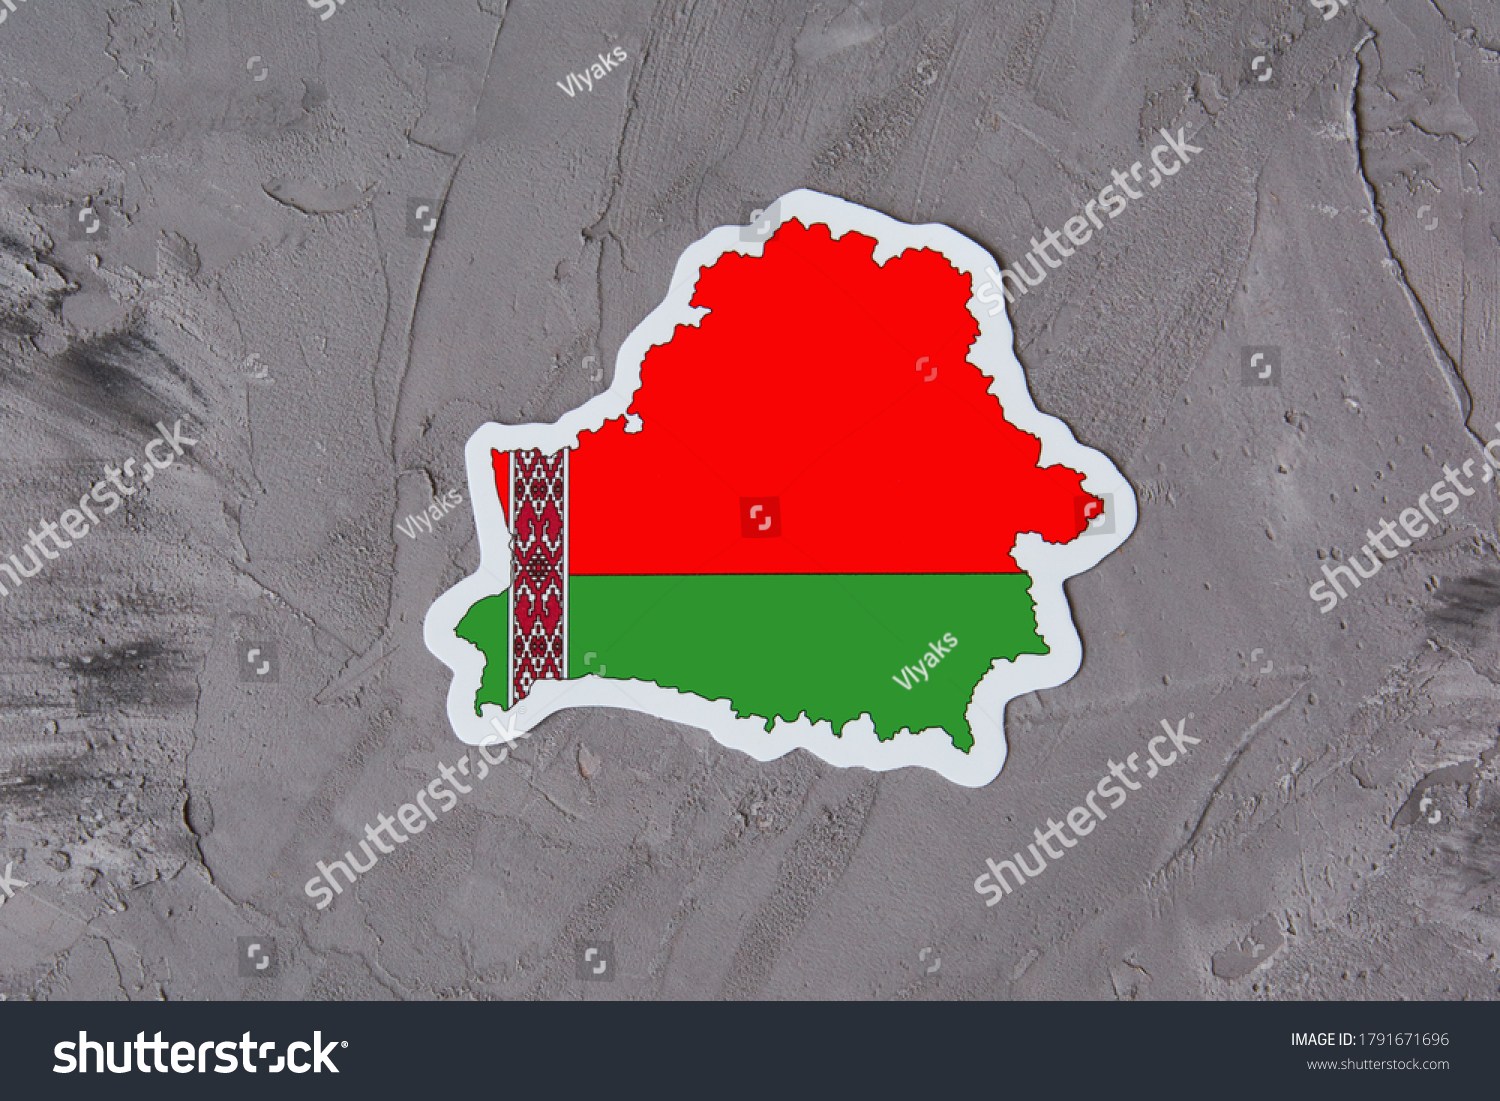 Country border outline map of Belarus. Shape and national flag of the Republic of Belarus on grey concrete background. Election concept. #1791671696